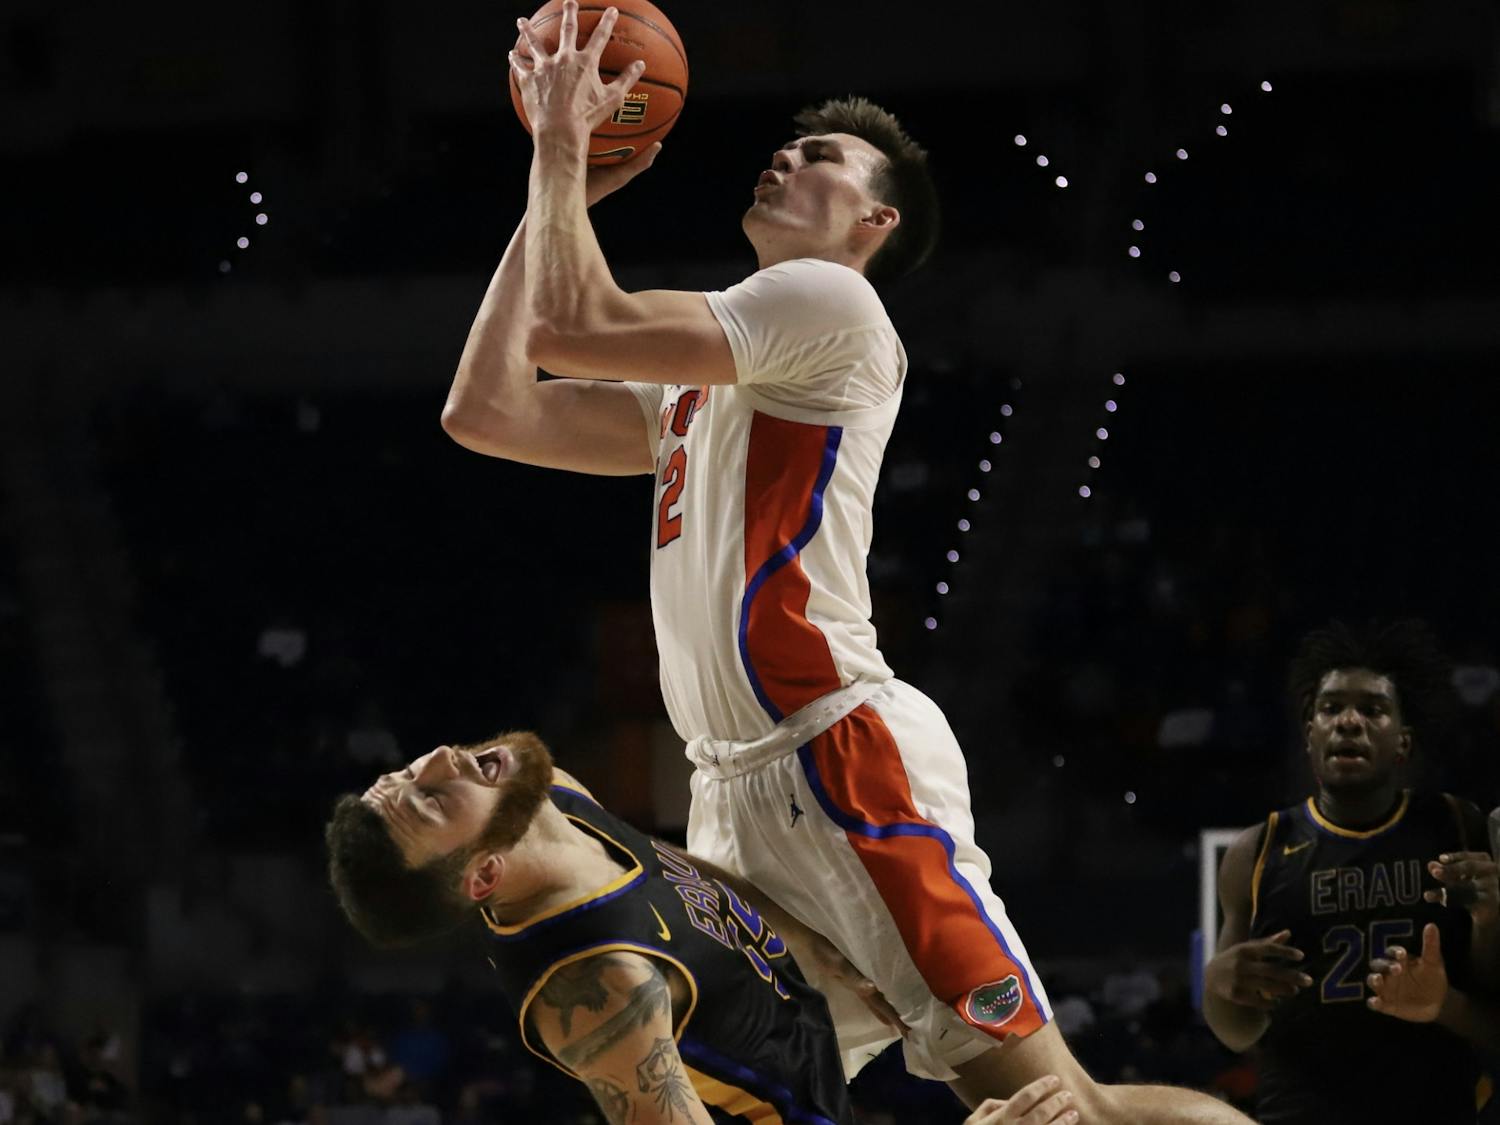 Florida's Colin Castleton, pictured in white, plays during an exhibition game against Embry-Riddle on Nov. 2.